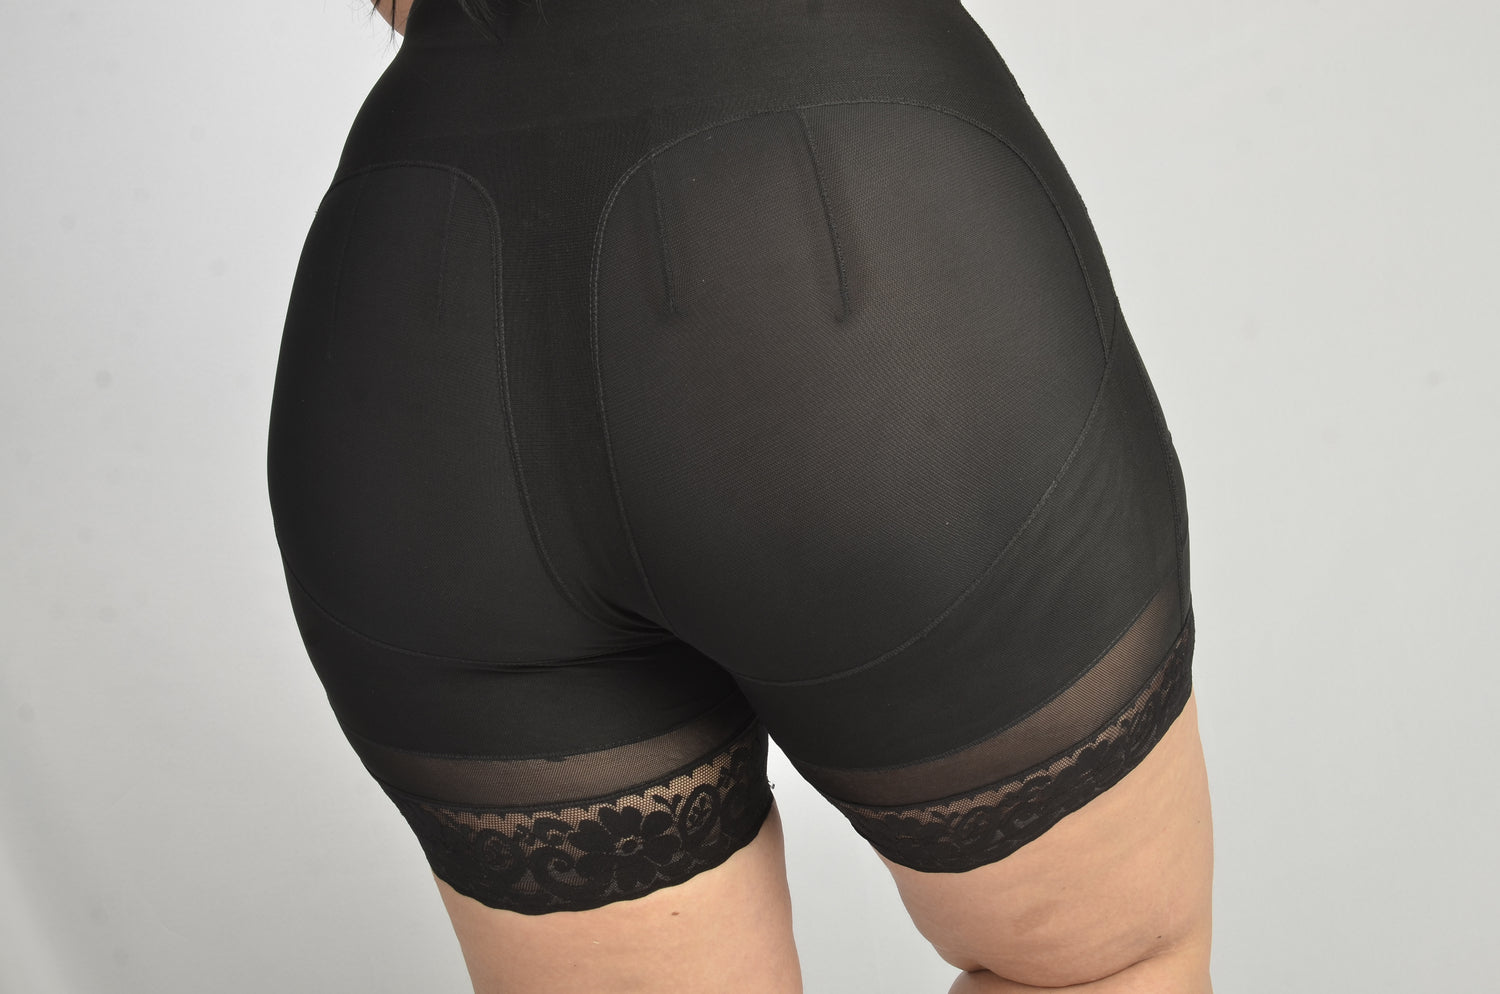 ZBR Hip Enhancer Padded Panties - Instantly Lift and Shape Your Hips and  Butt